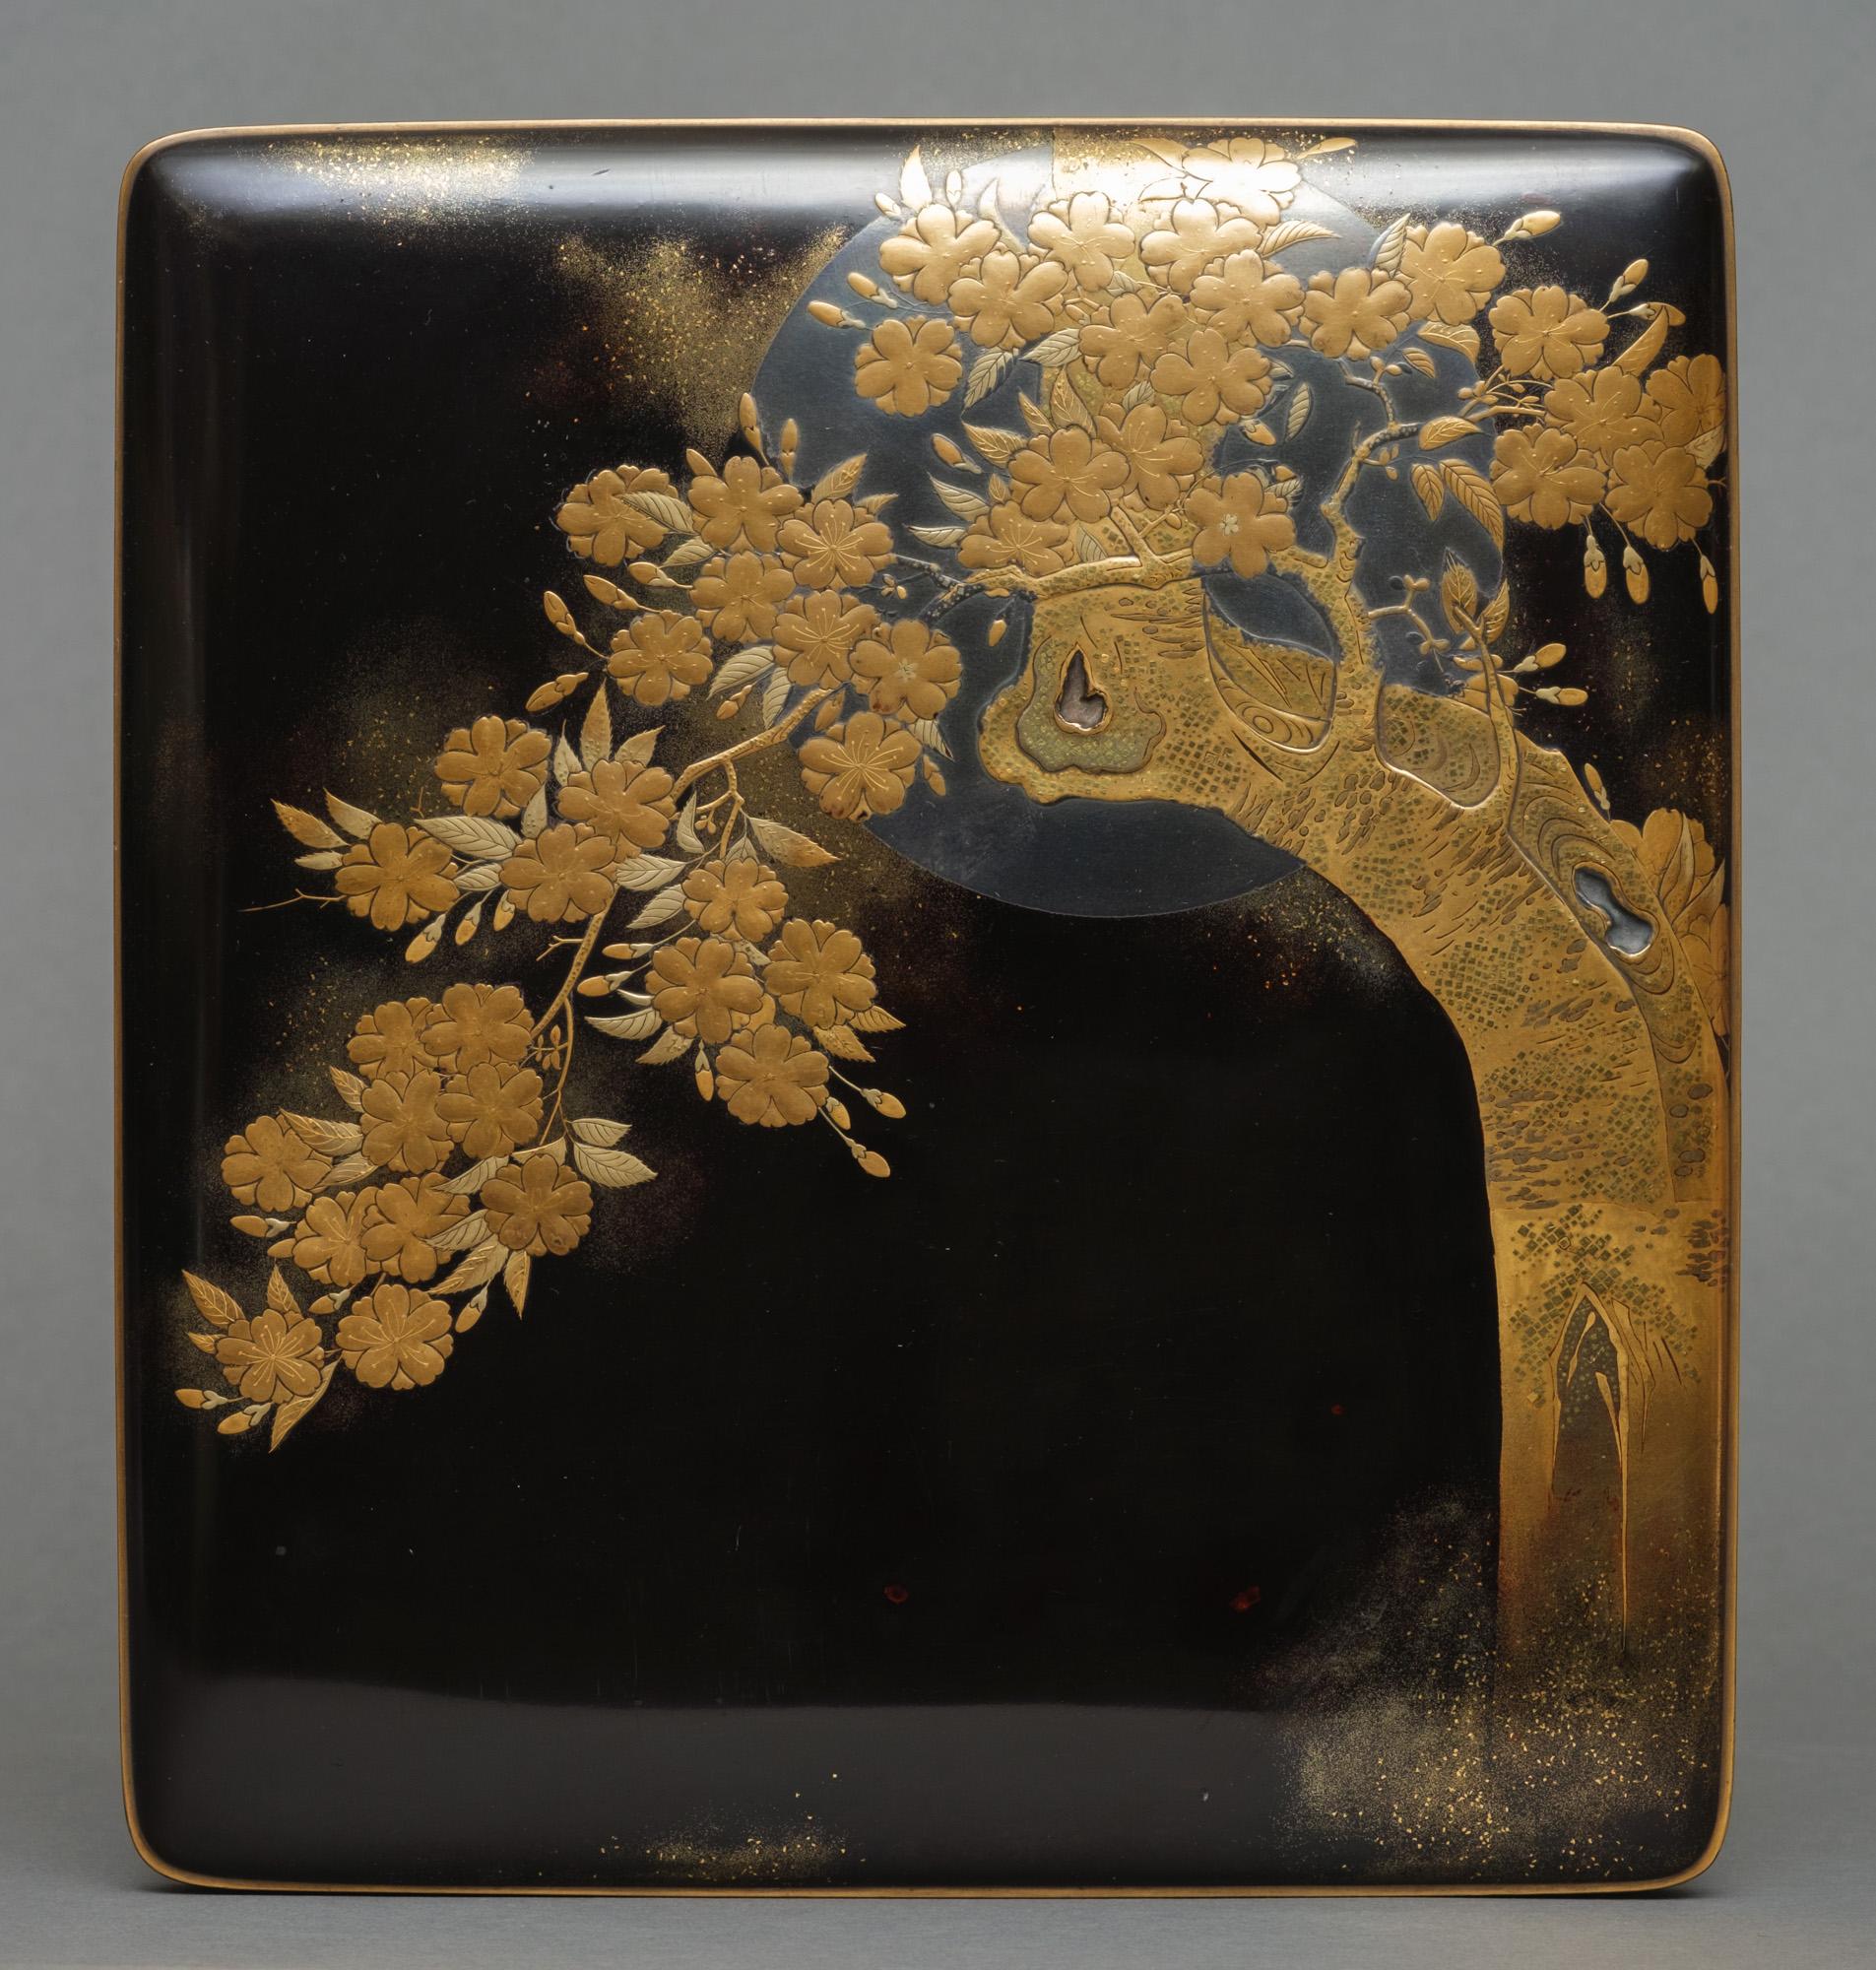 A very well-made, beautiful black lacquer rectangular suzuri’bako (writing box) with rounded corners. The well-fitted overhanging cover with a design of a lush cherry blossom tree (sakura) in full bloom with prominent recessed burls, and with a